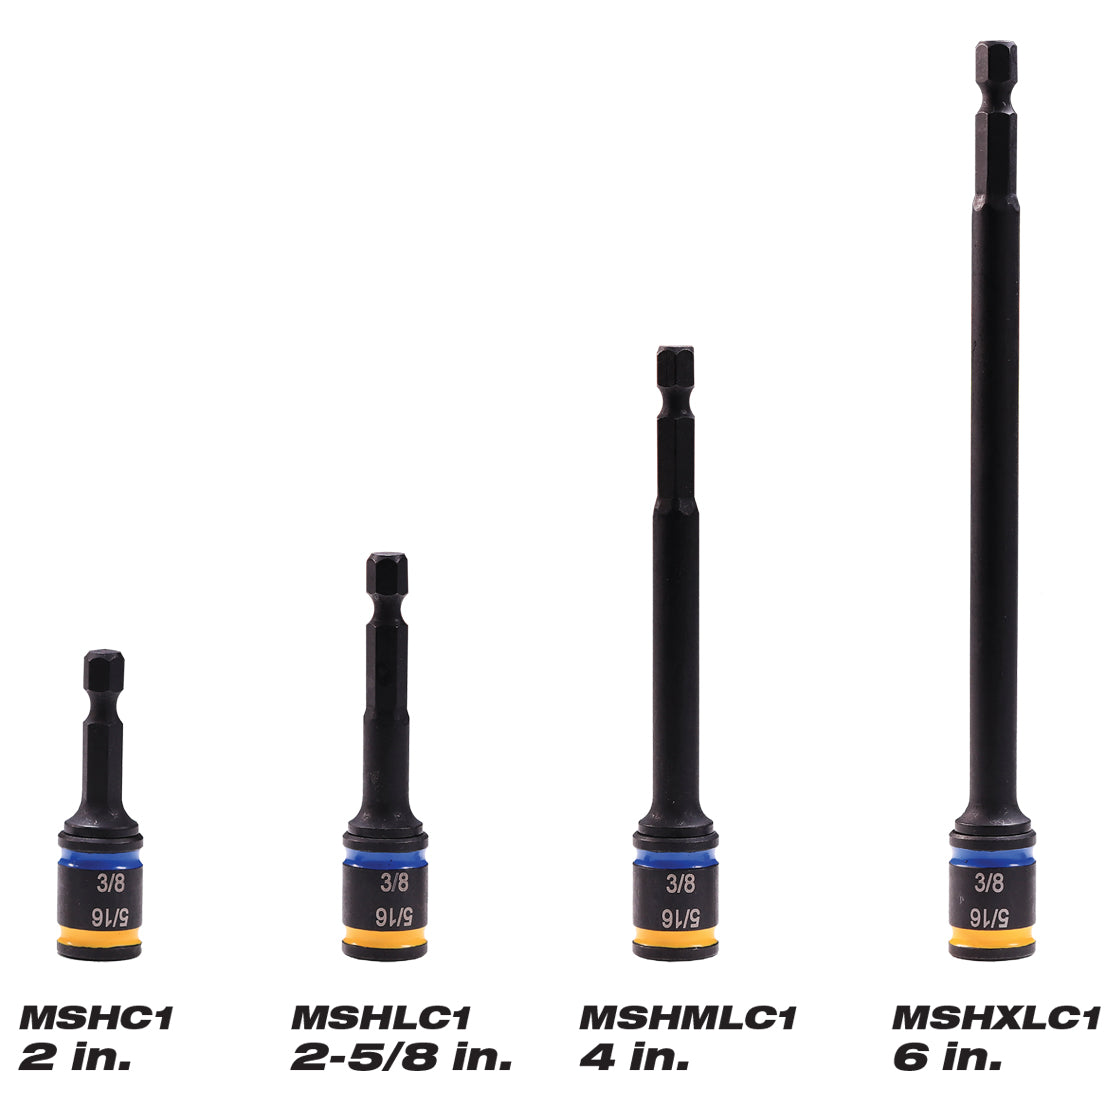 MSHXLC1 - C-RHEX Cleanable, Reversible Magnetic Hex Drivers, 5/16" and 3/8", 6" Length